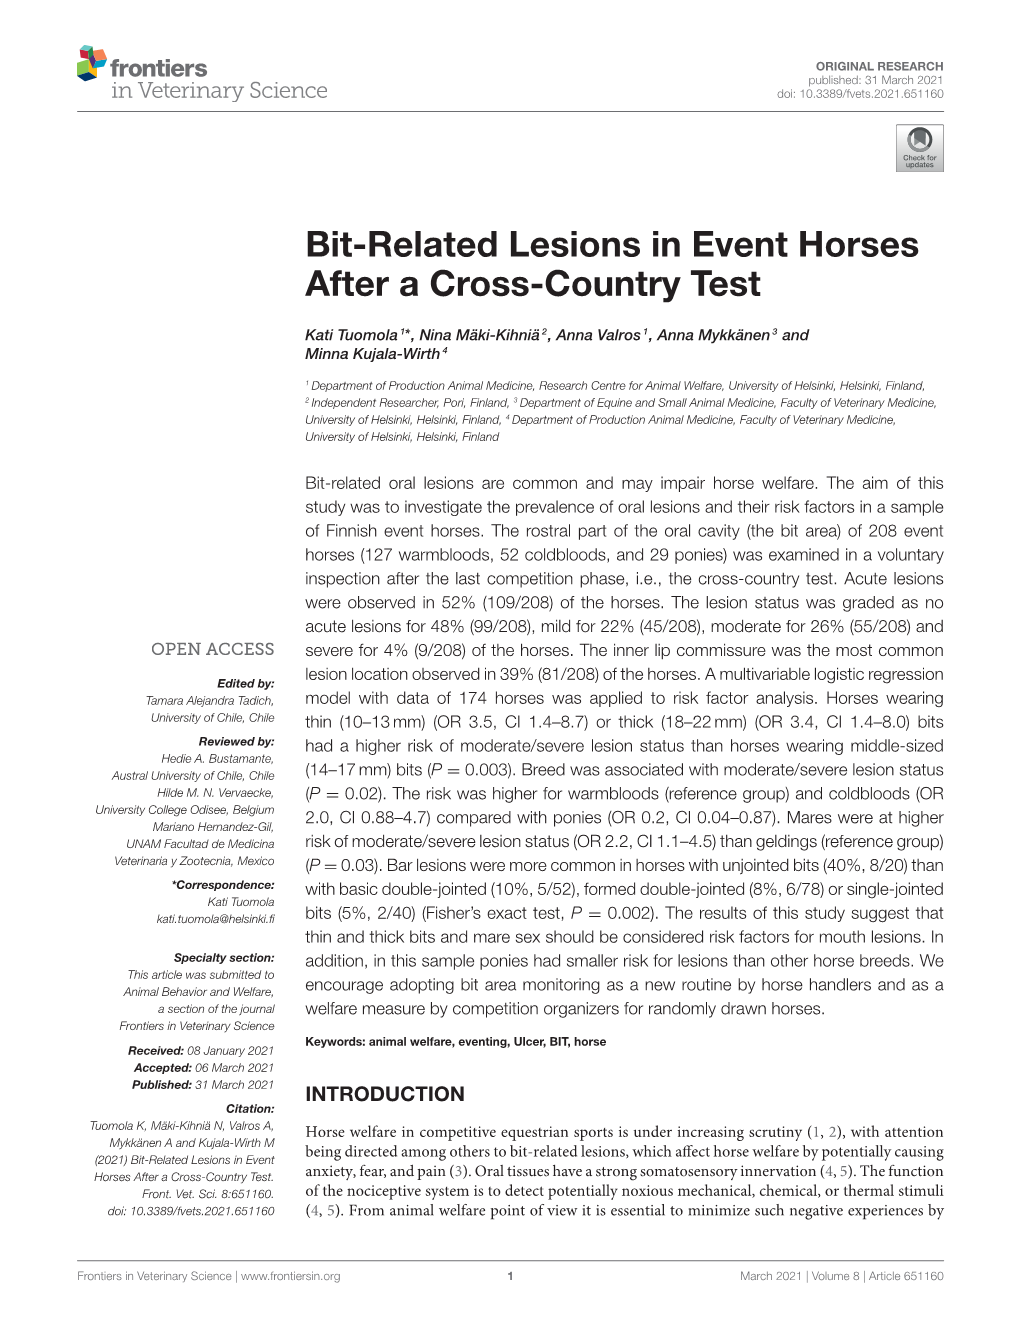 Bit-Related Lesions in Event Horses After a Cross-Country Test